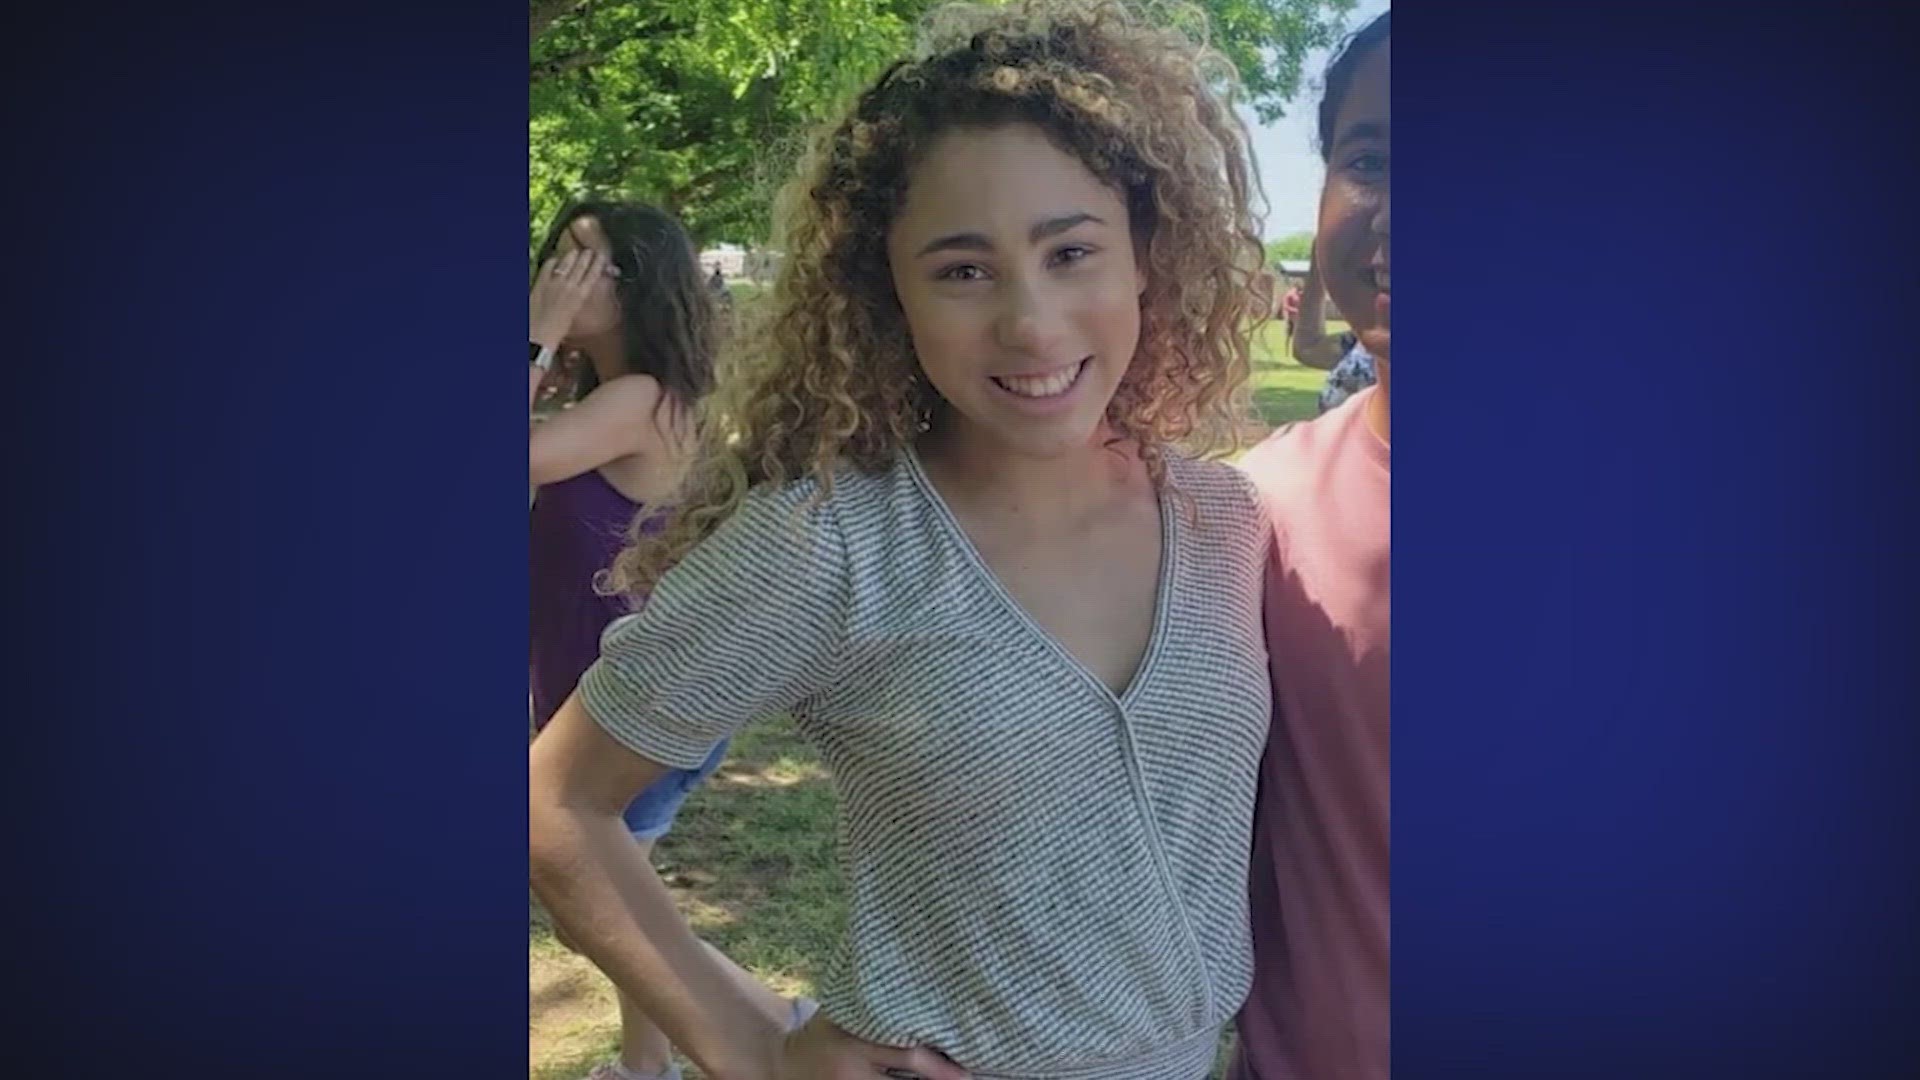 Payton Washington, who trains in The Woodlands, spent days in ICU after she was shot. Pedro Tello Rodriguez Jr. is charged with shooting her and another cheerleader.